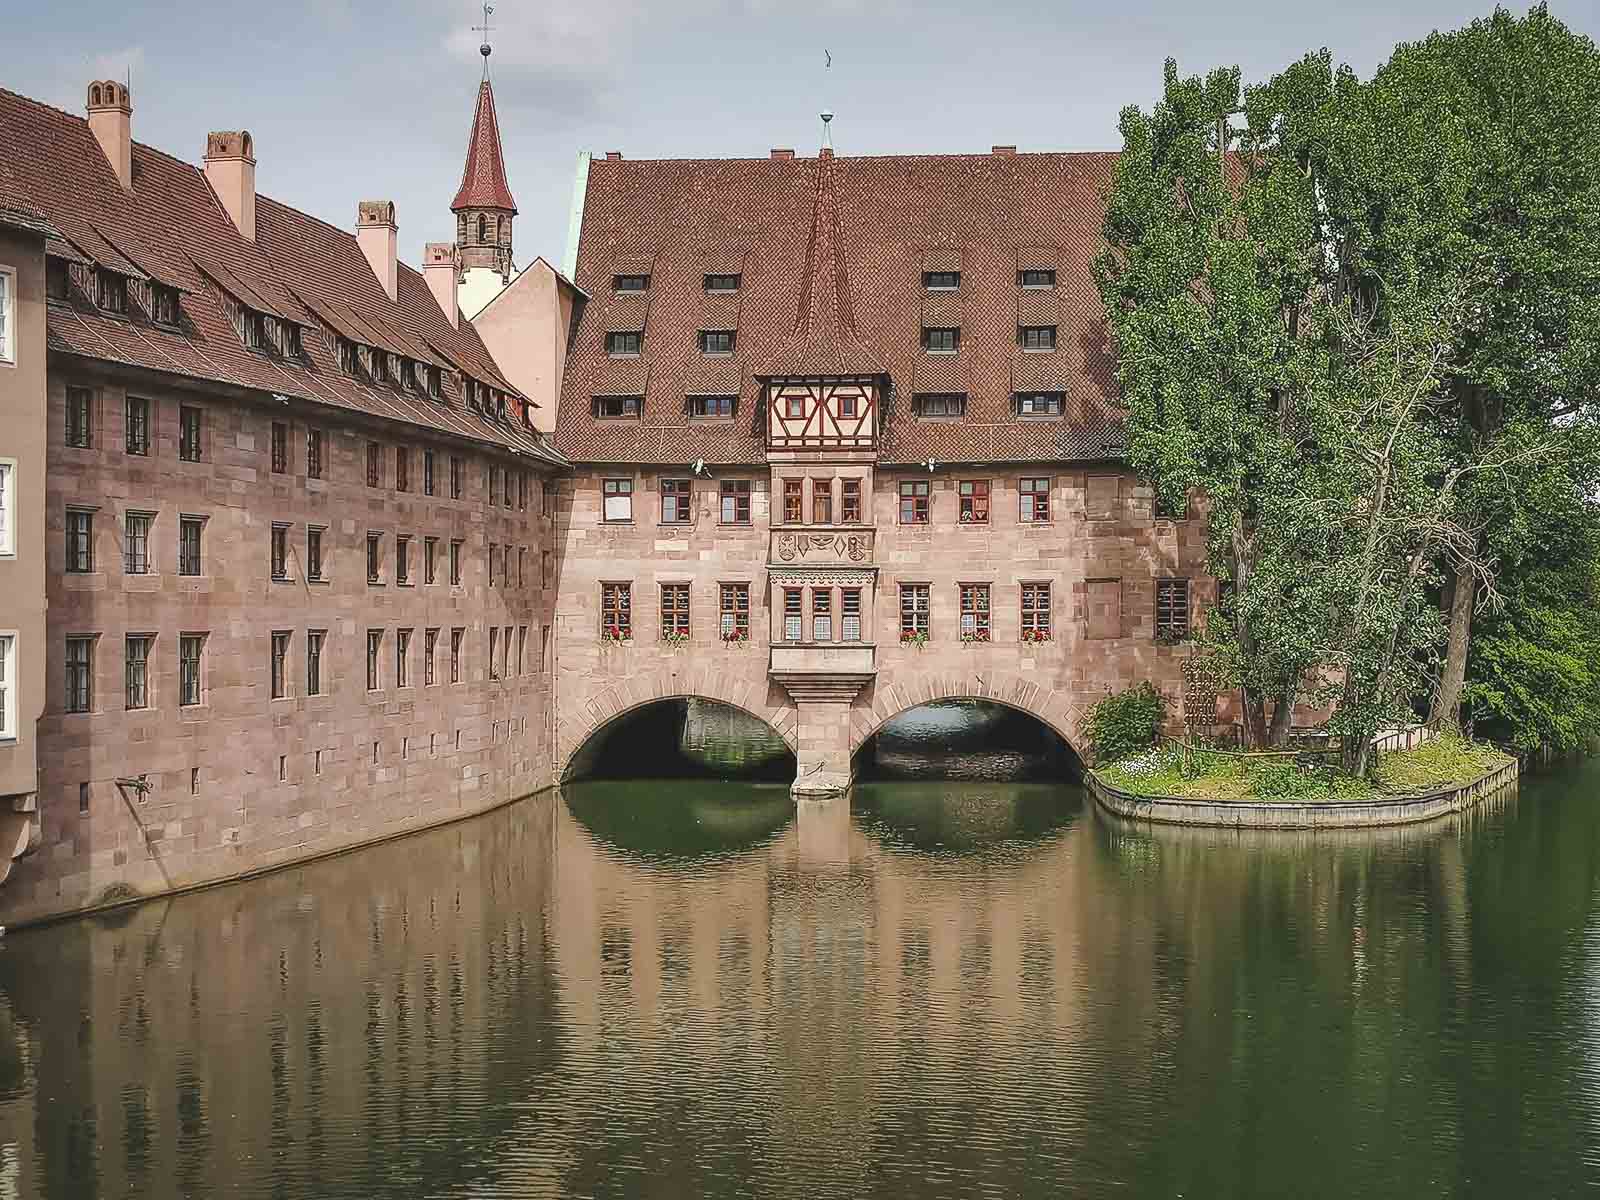 Walk the canal in Nuremberg